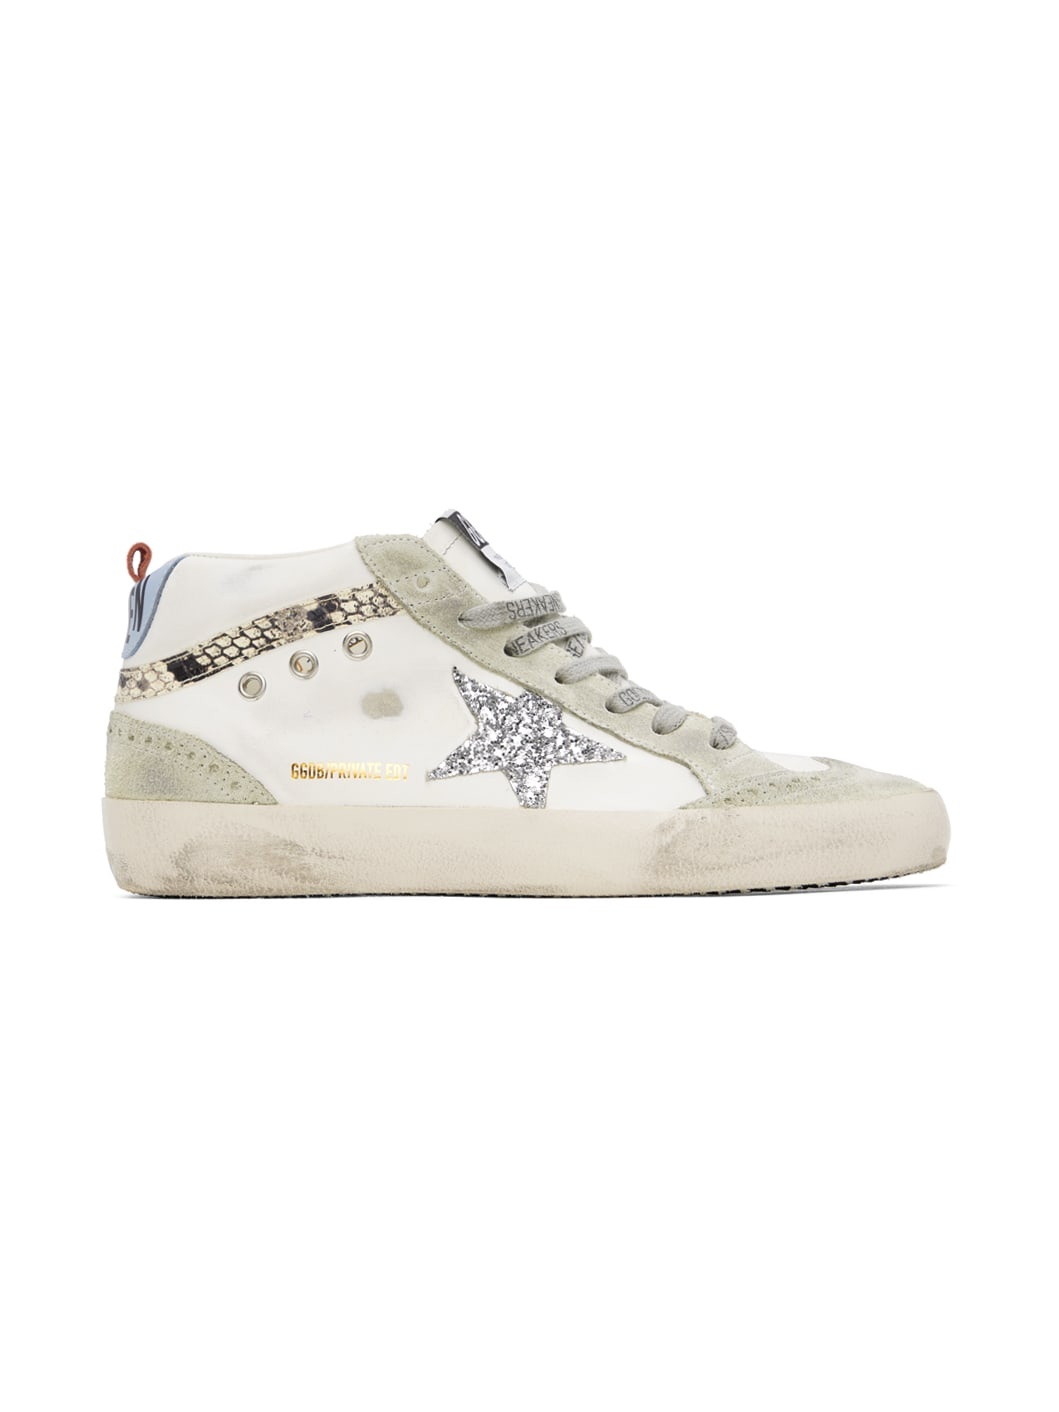 SSENSE Exclusive White & Gray Mid Star Sneakers - 1